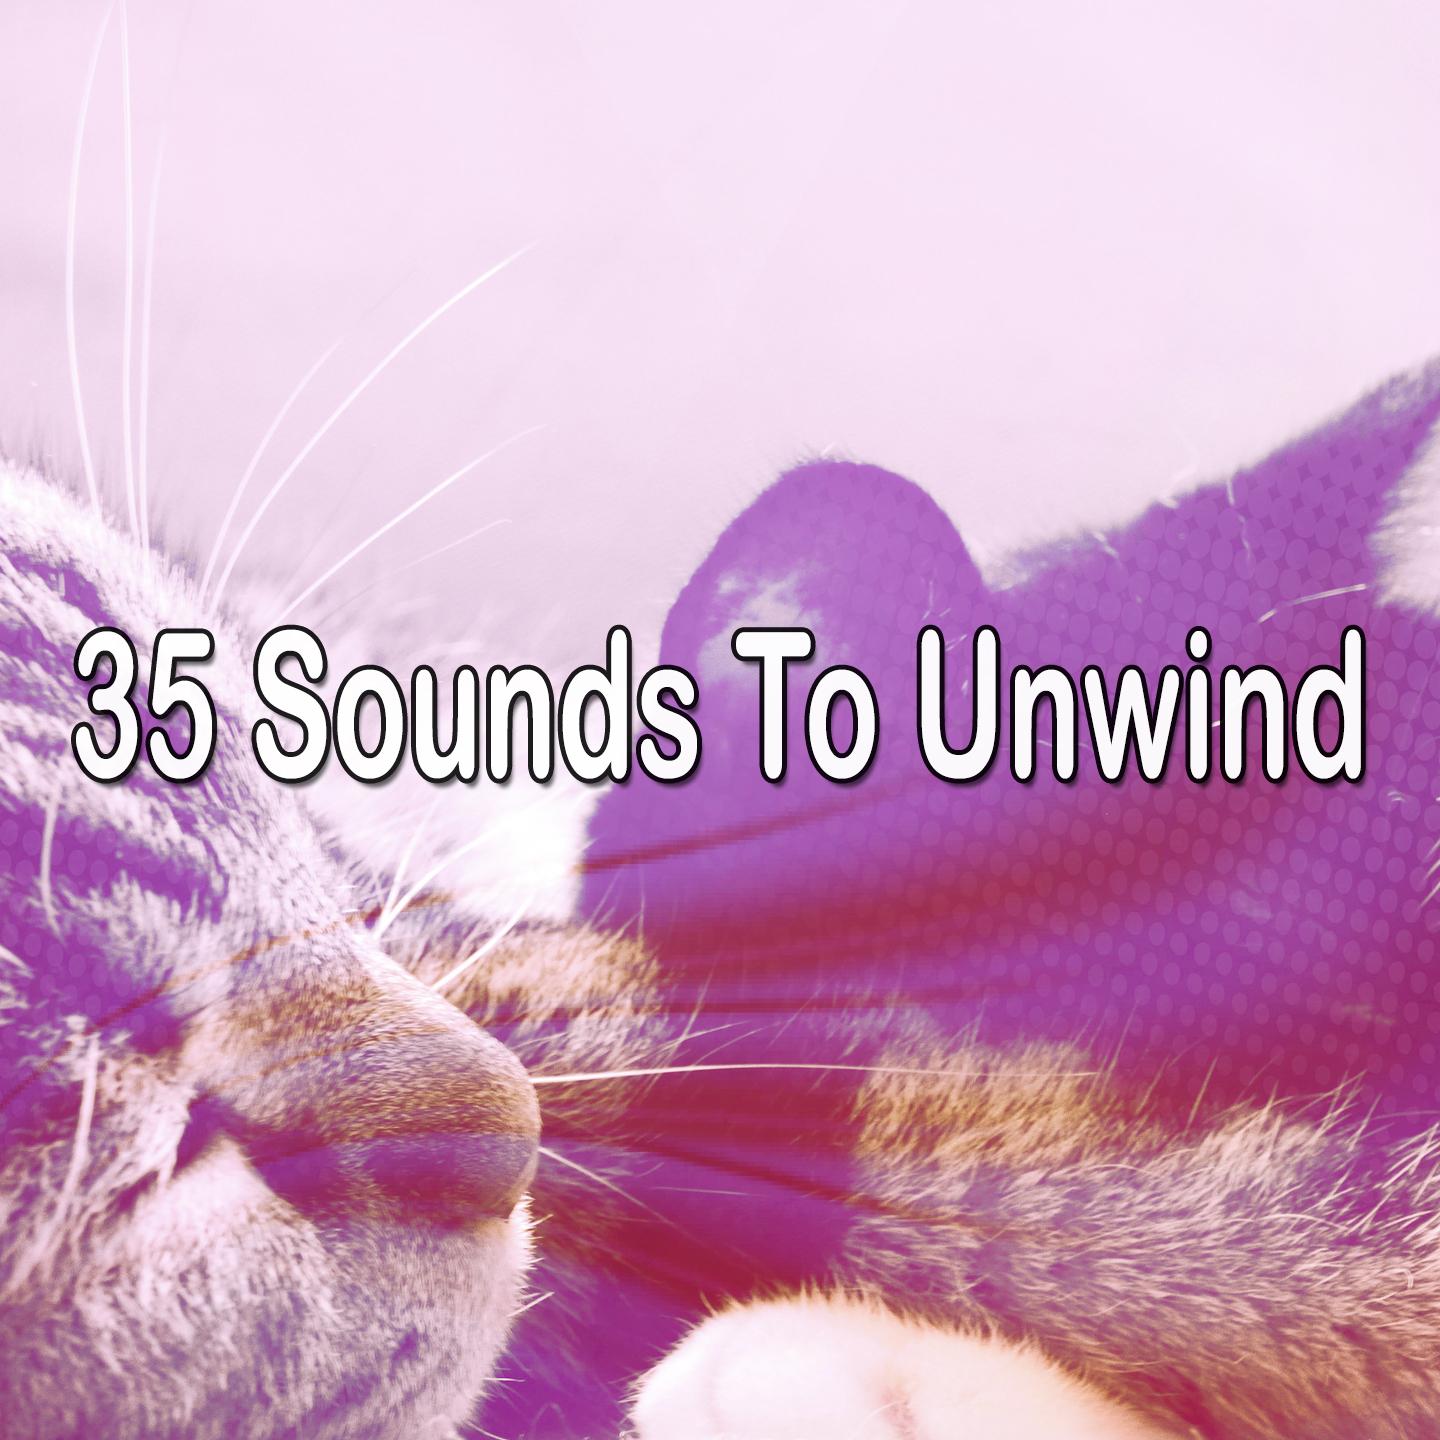 35 Sounds To Unwind